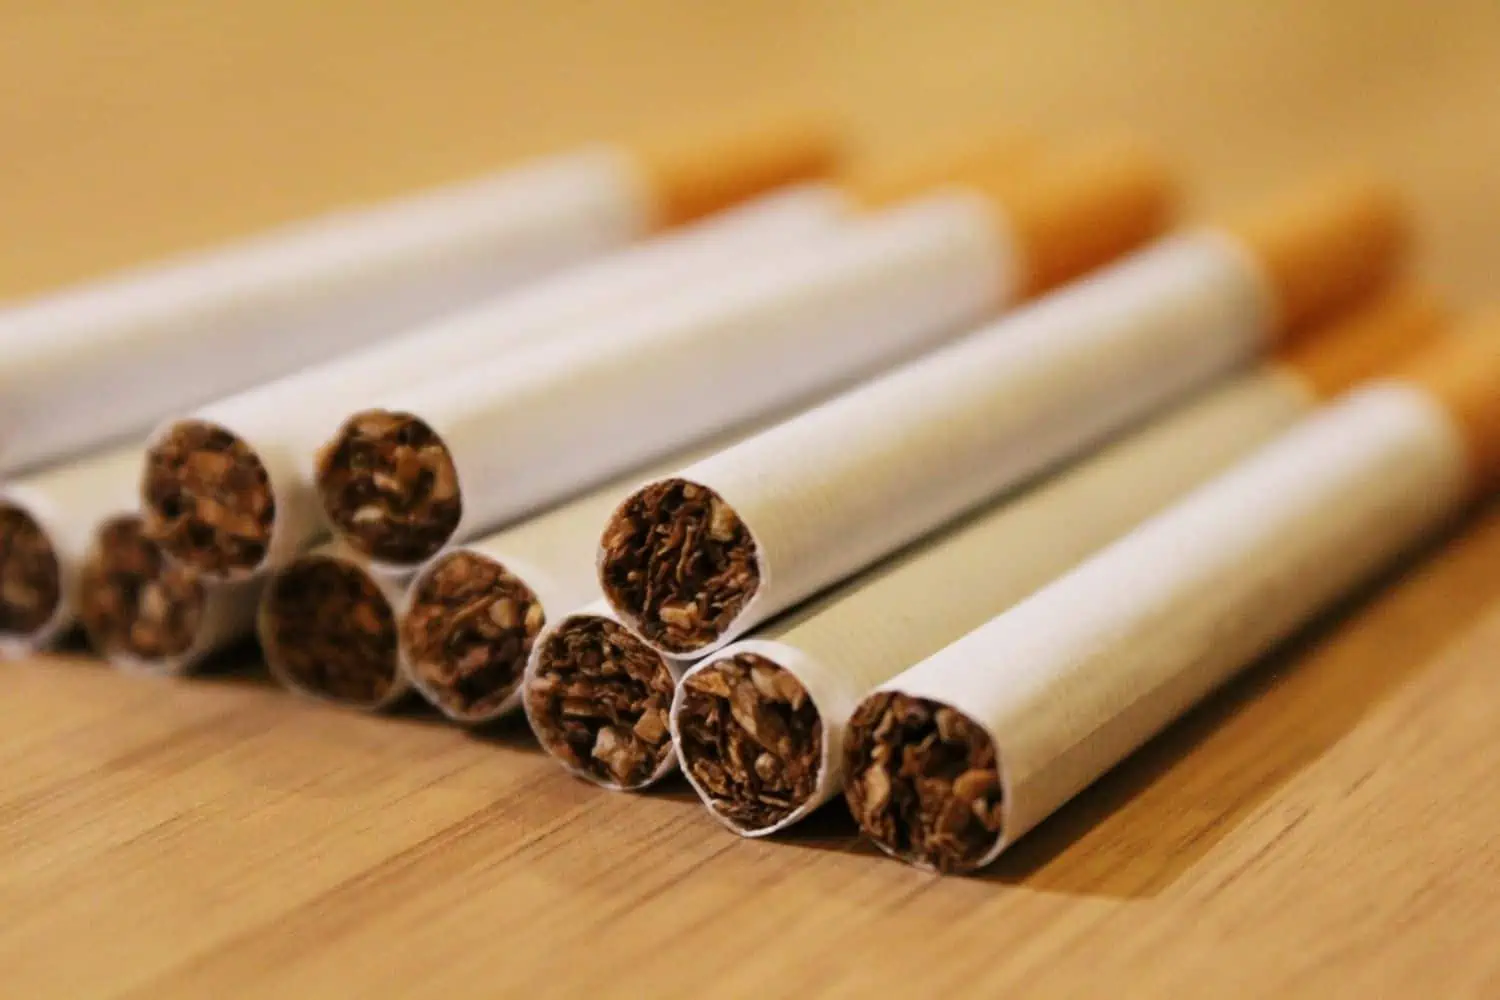 Top News for 7 April 2022 - Illegal tobacco sales deprive the 'fiscus' of R19 billion per year